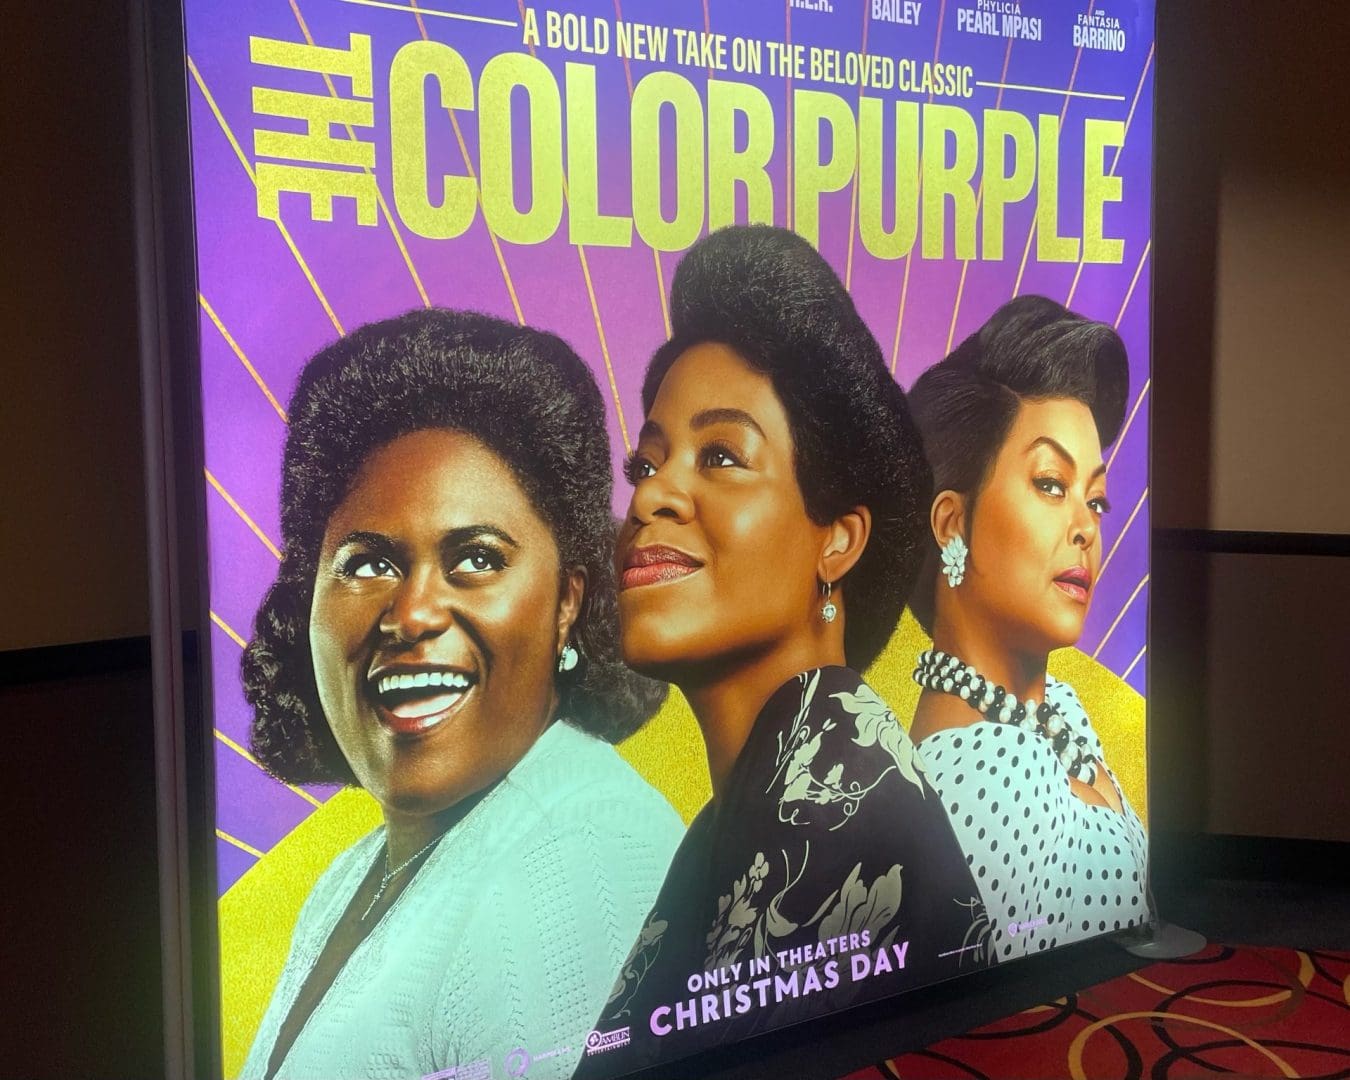 The Color Purple: An empowering remake with an all-star cast